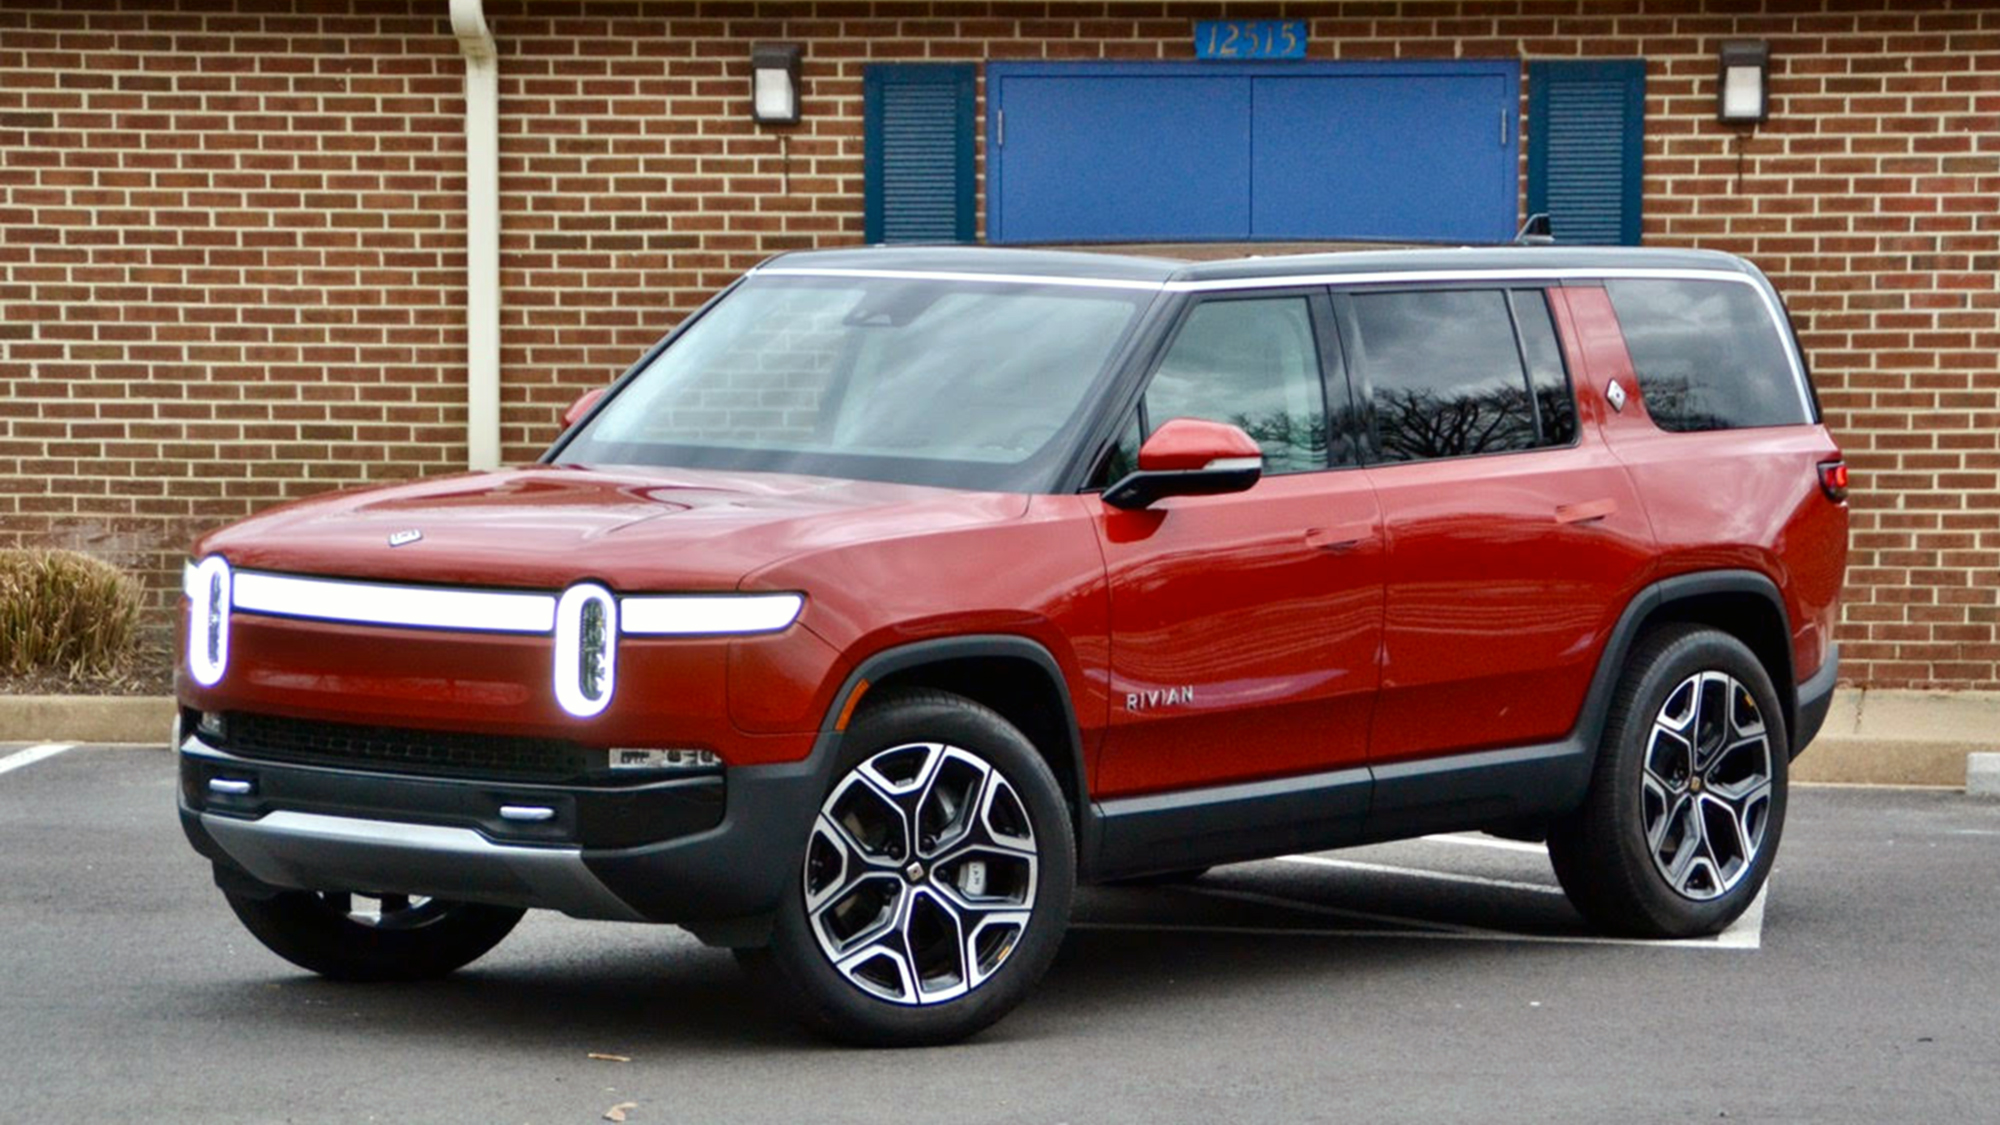 The Rivian R1S marries the box-it-came-in styling of the company’s R1T pickup truck with the three-row SUV body style families need.